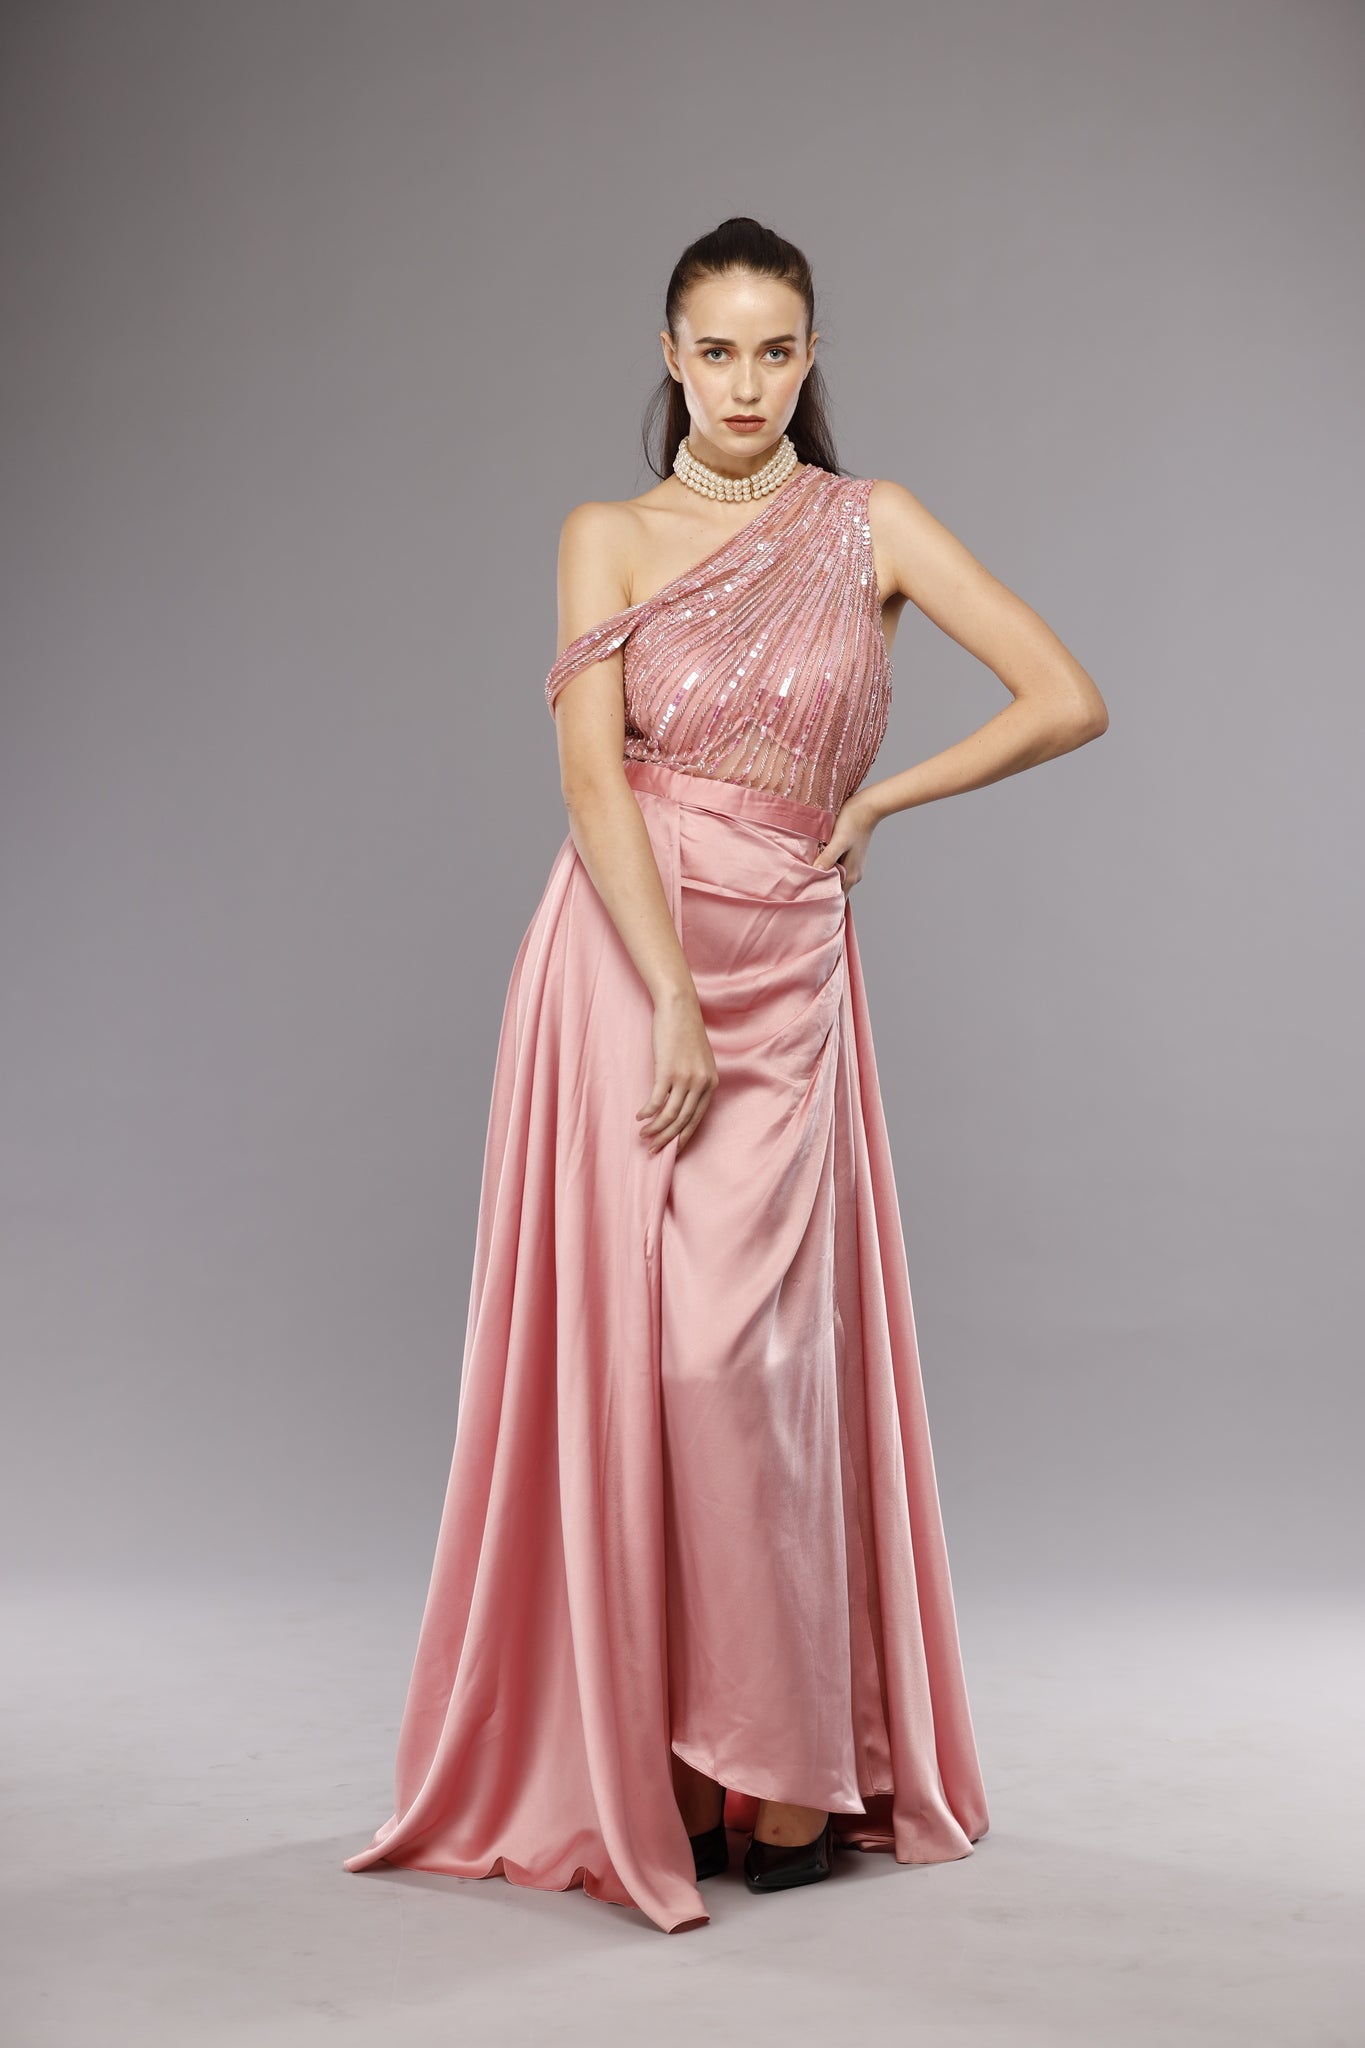 The Cocktail Glam Gown